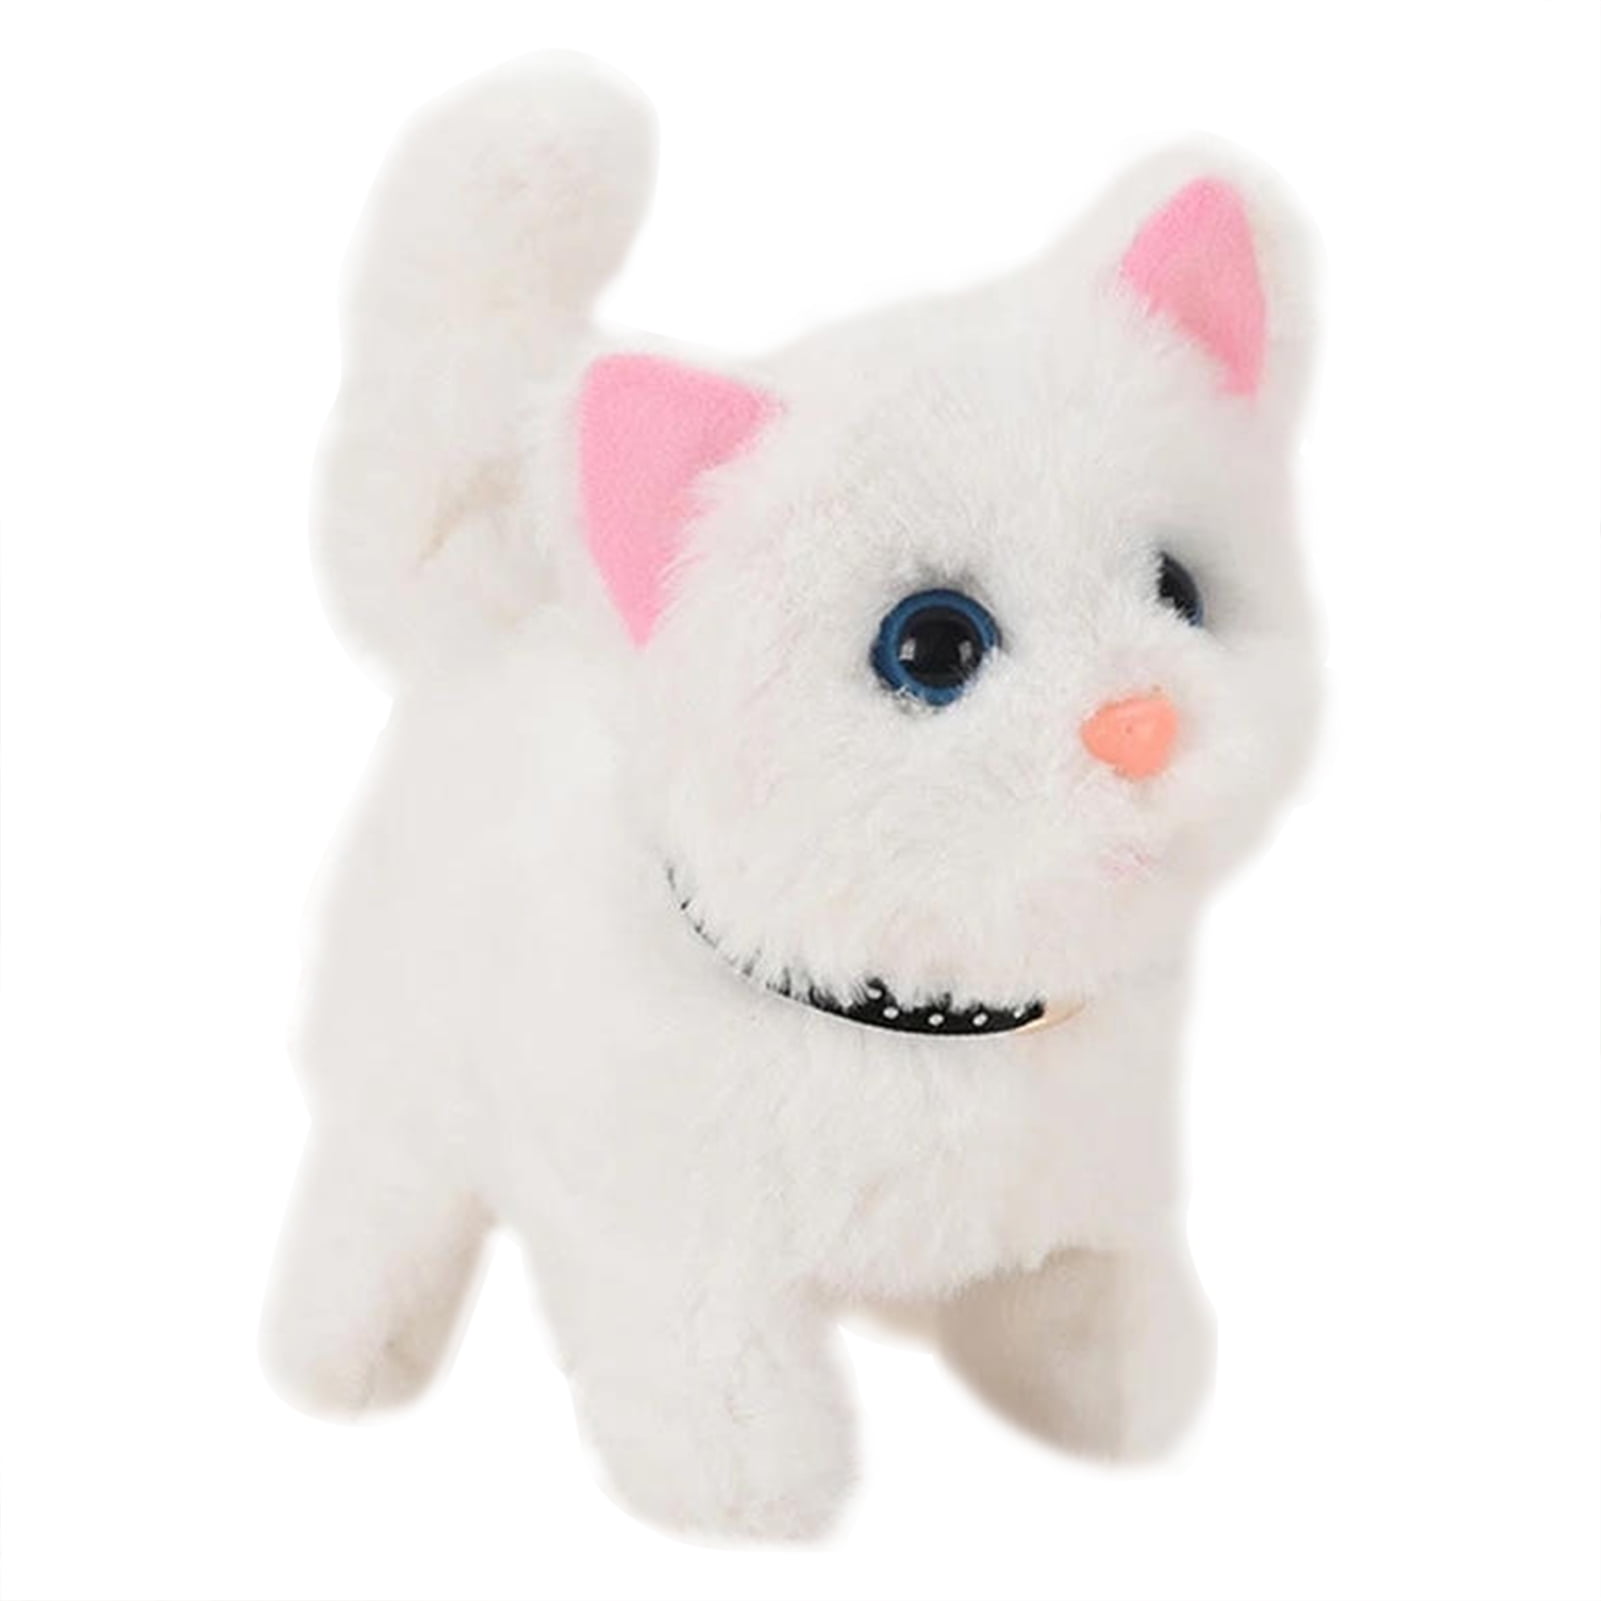 Soft Plush Cat Stuffed Toy Electronic Robot Animal Cute Lovely Kitty for Kids 